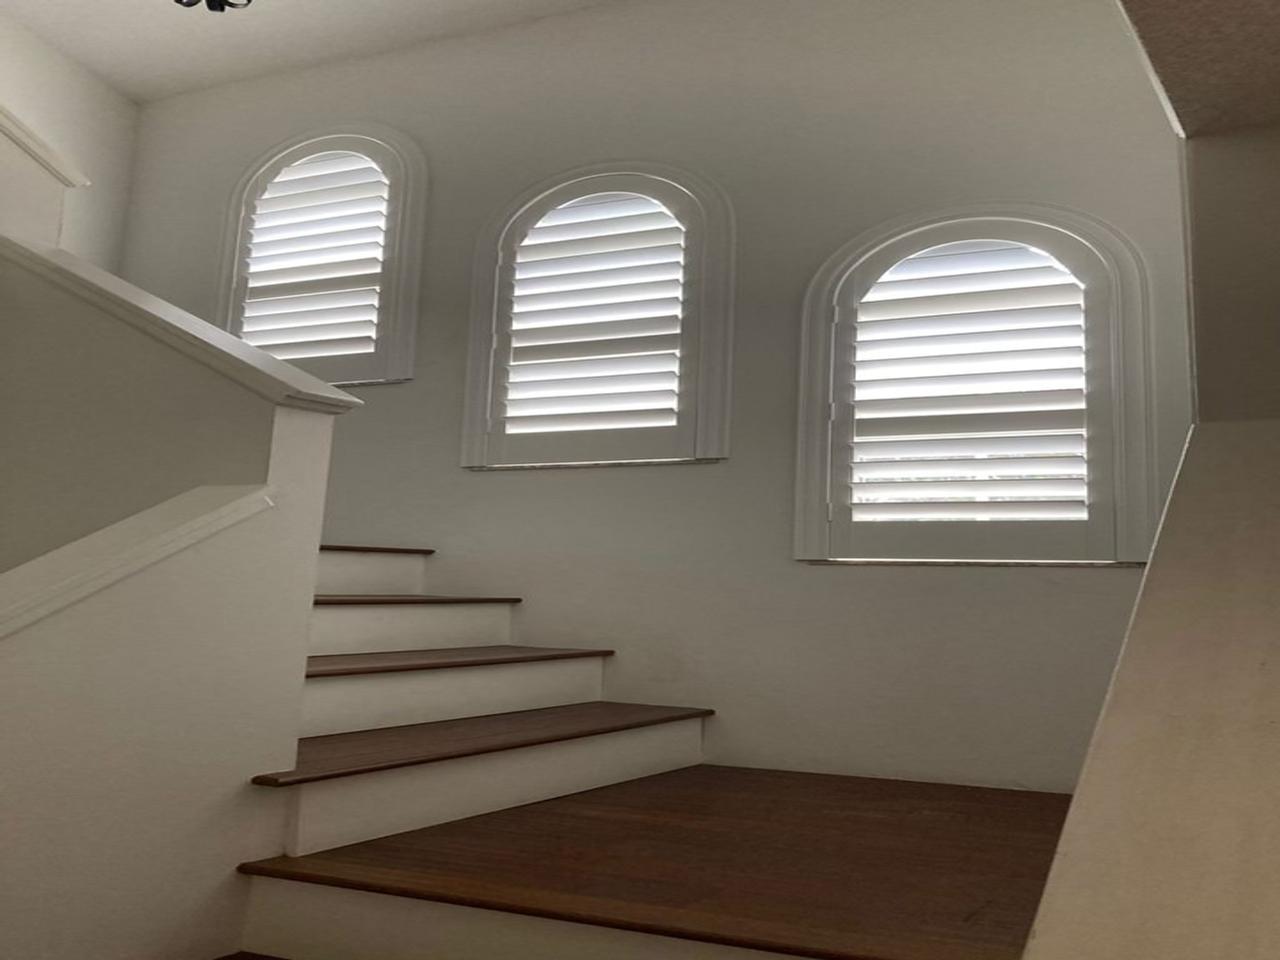 Arched windows with interior shutters in stairway